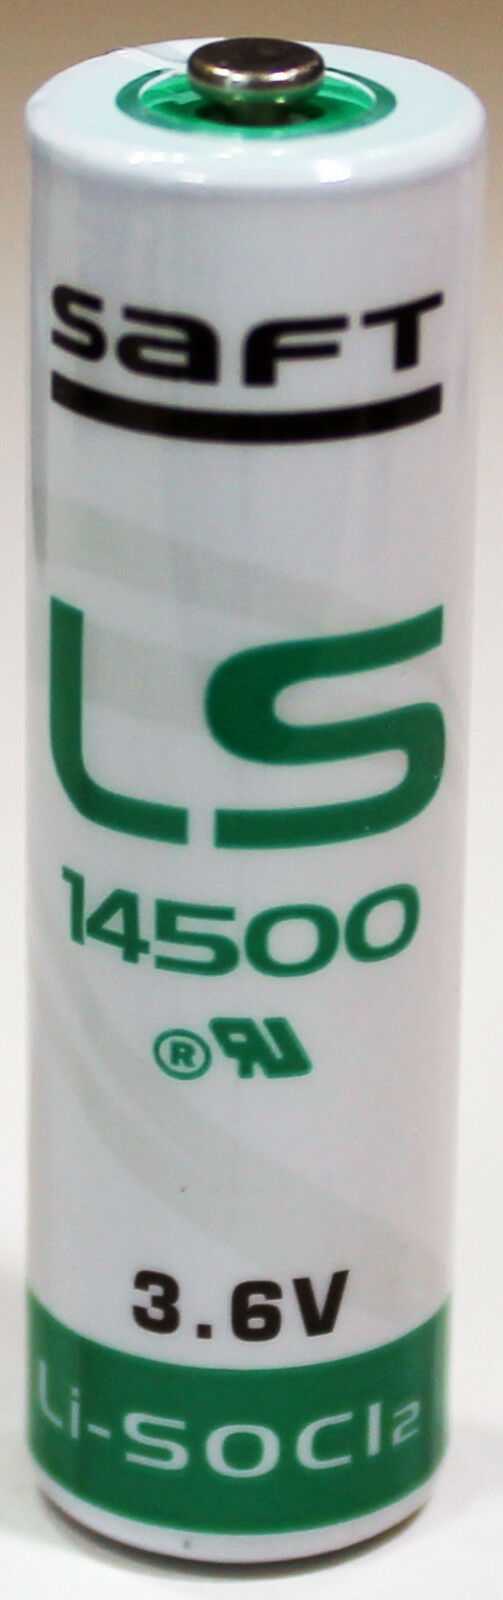 1PC Saft LS-14500 AA 3.6V Lithium Battery, Primary LS 14500 - Made in France/UK